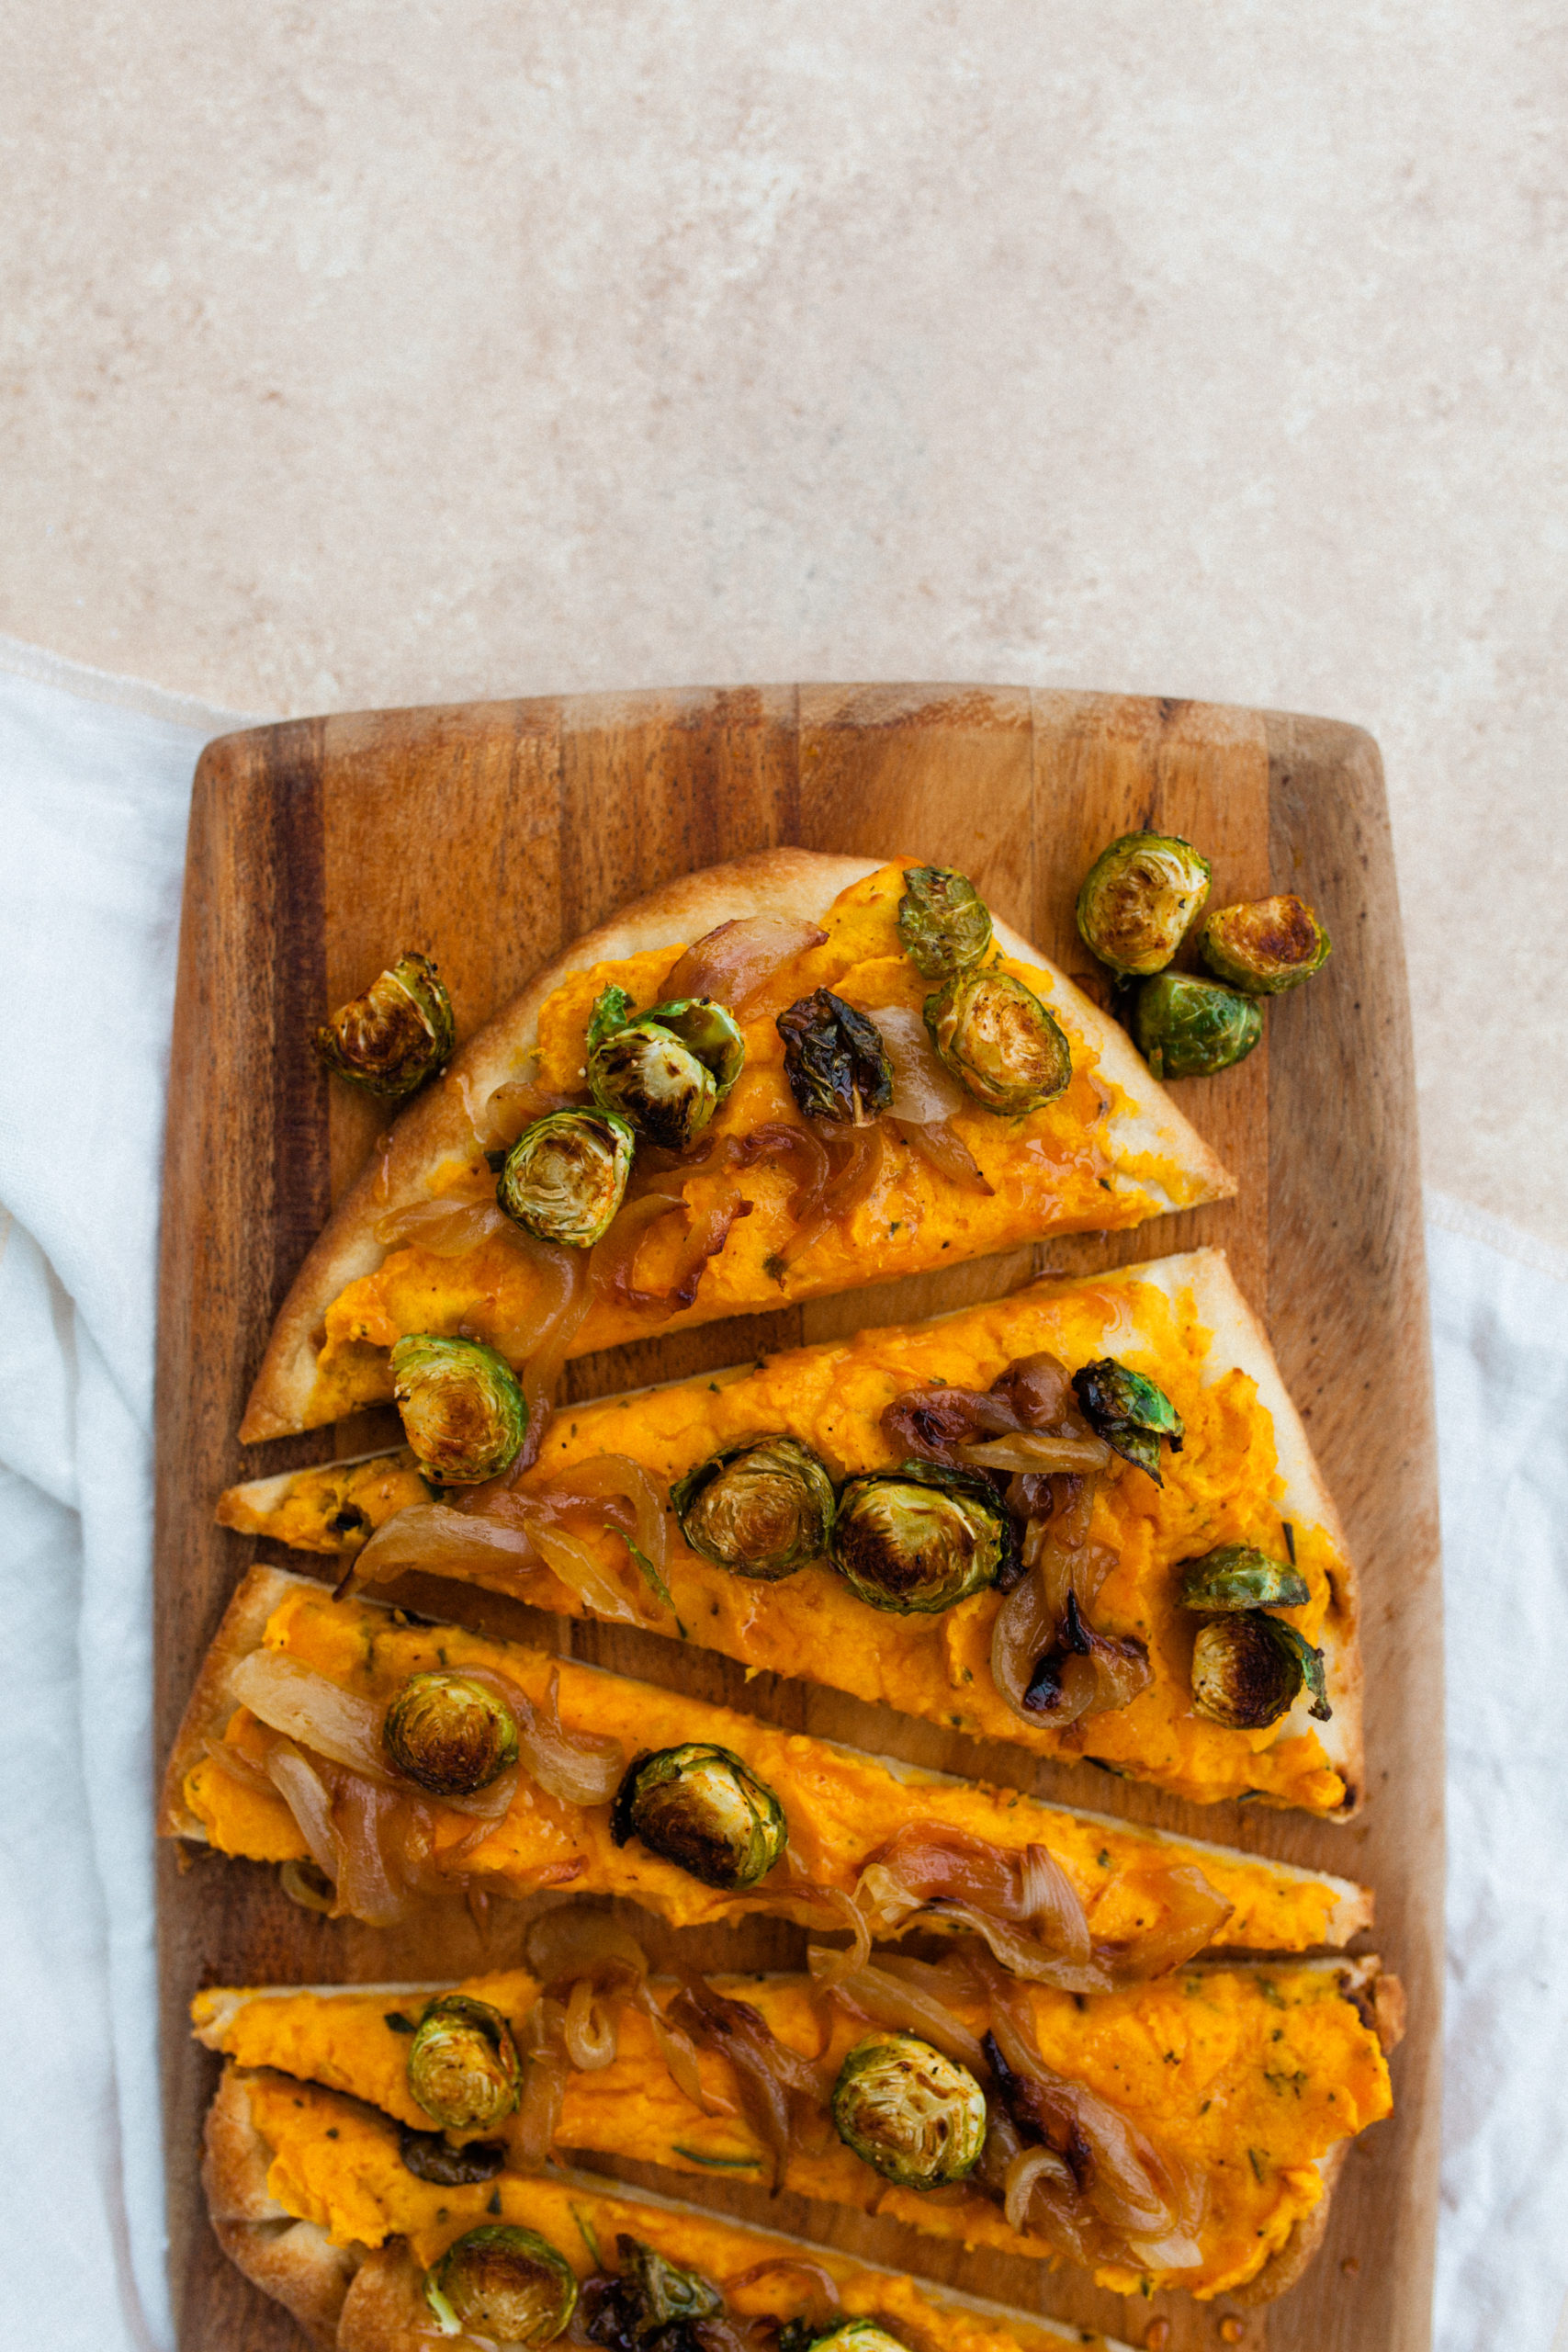 Fall Naan Pizza with Roasted Butternut Squash and Brussels Sprouts | bygabriella.co @gabivalladares